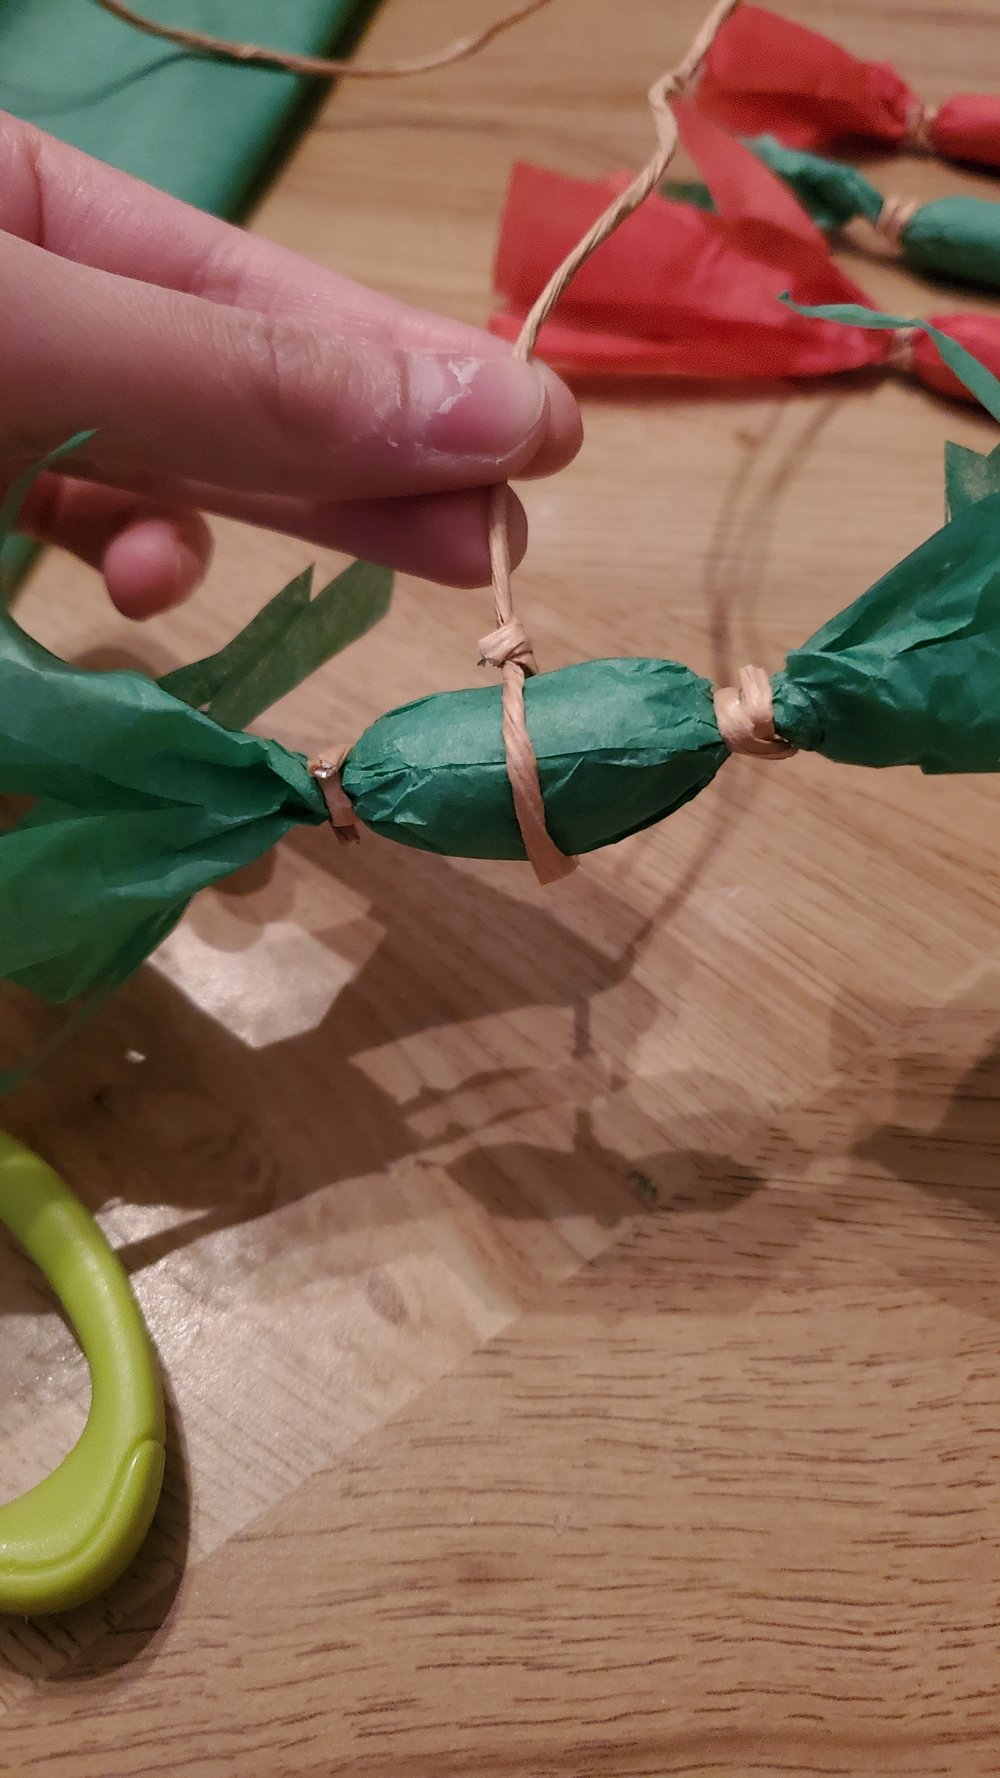  Tie a string around the middle of a peanut to make the bottom of the peanut ornament  